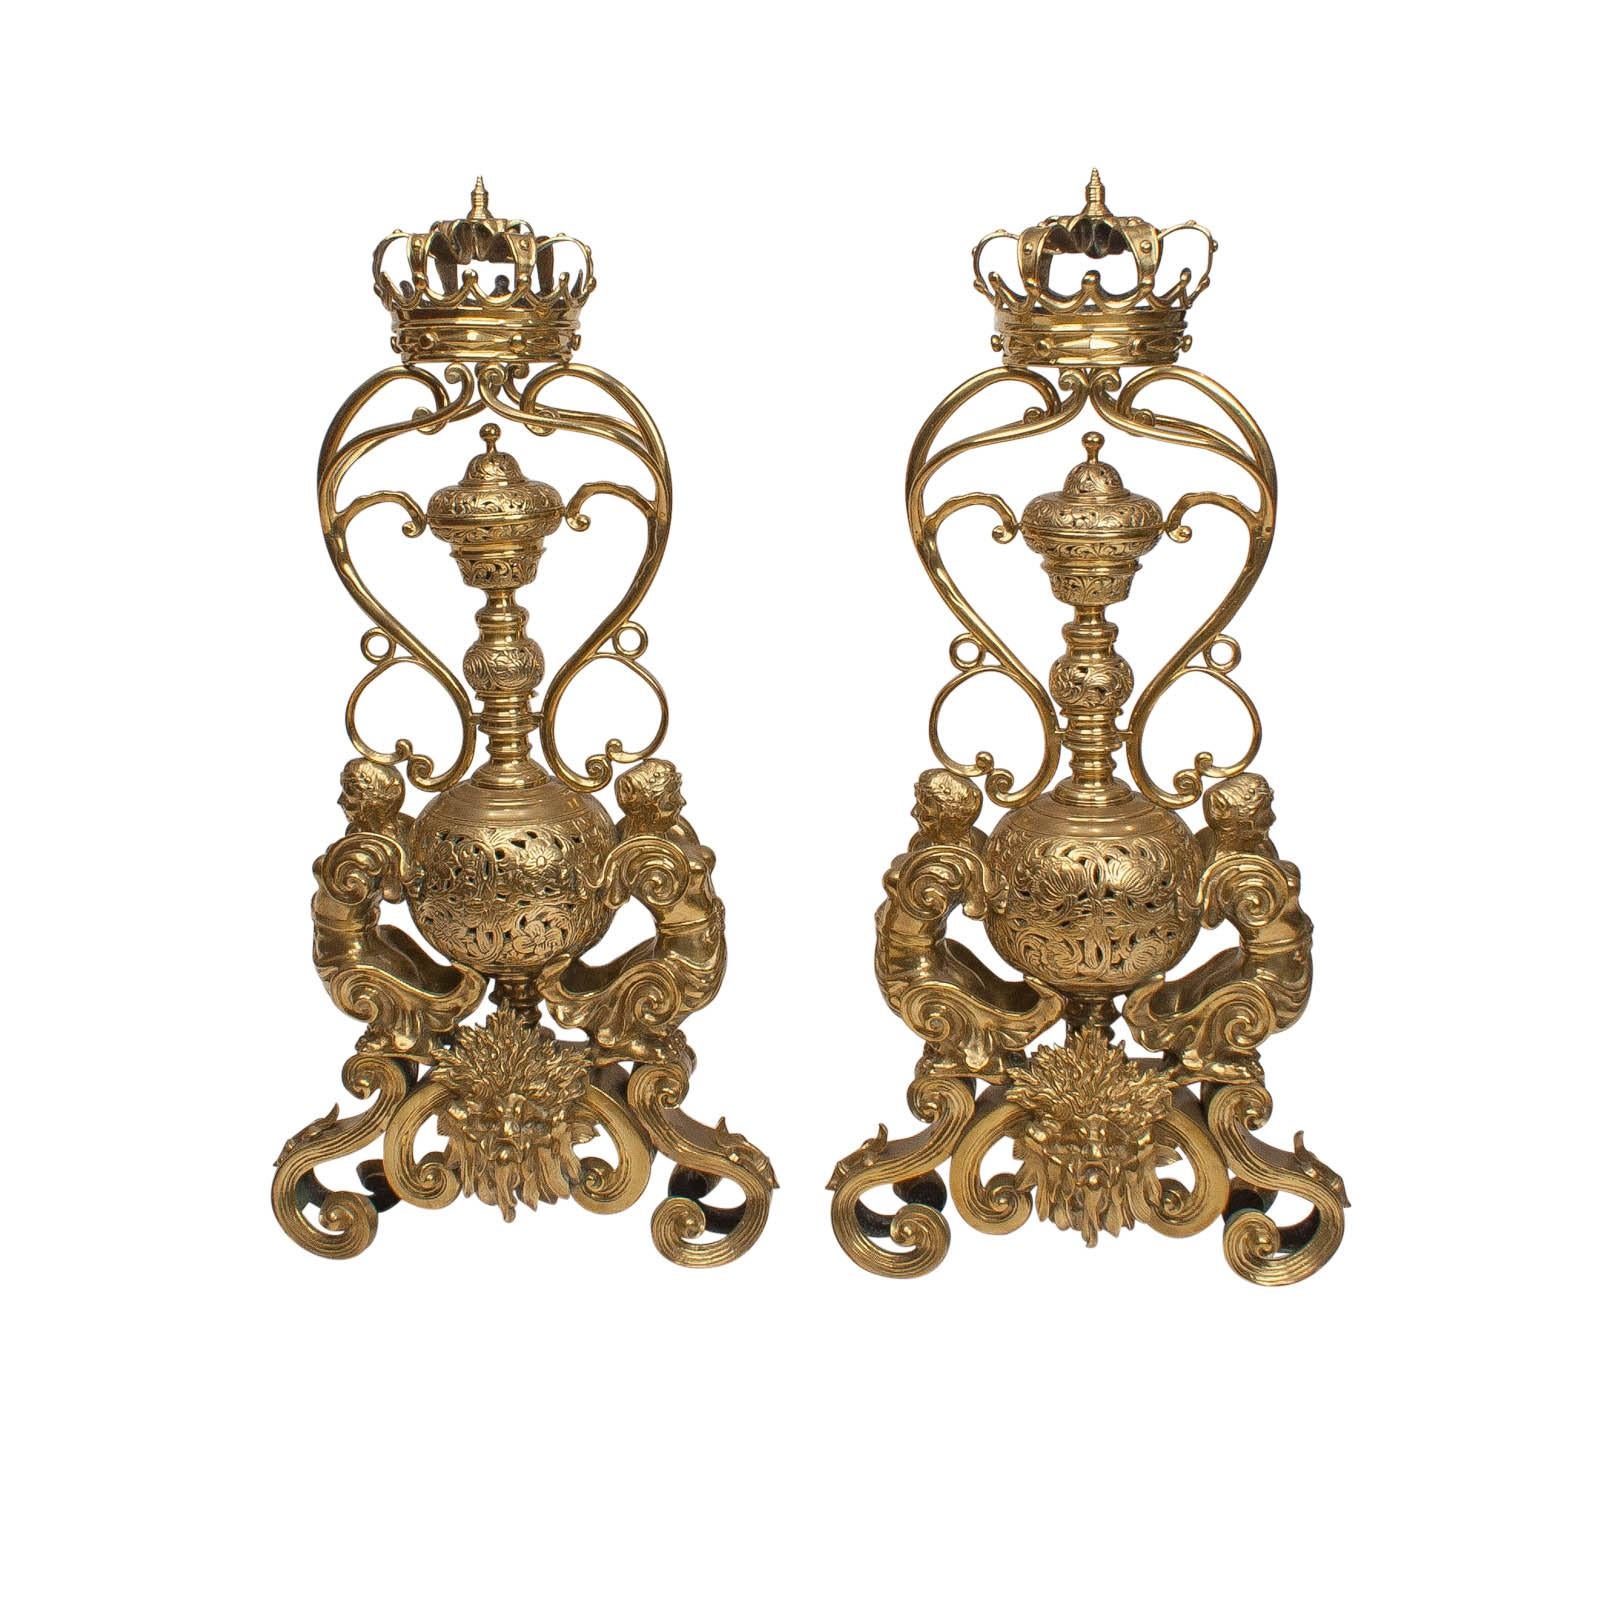 Hard to imagine a more ornate pair of andirons. These are brass and made in England, circa 1820. The crowns suggest noble provenance. The andirons have an incense container below the crown to 